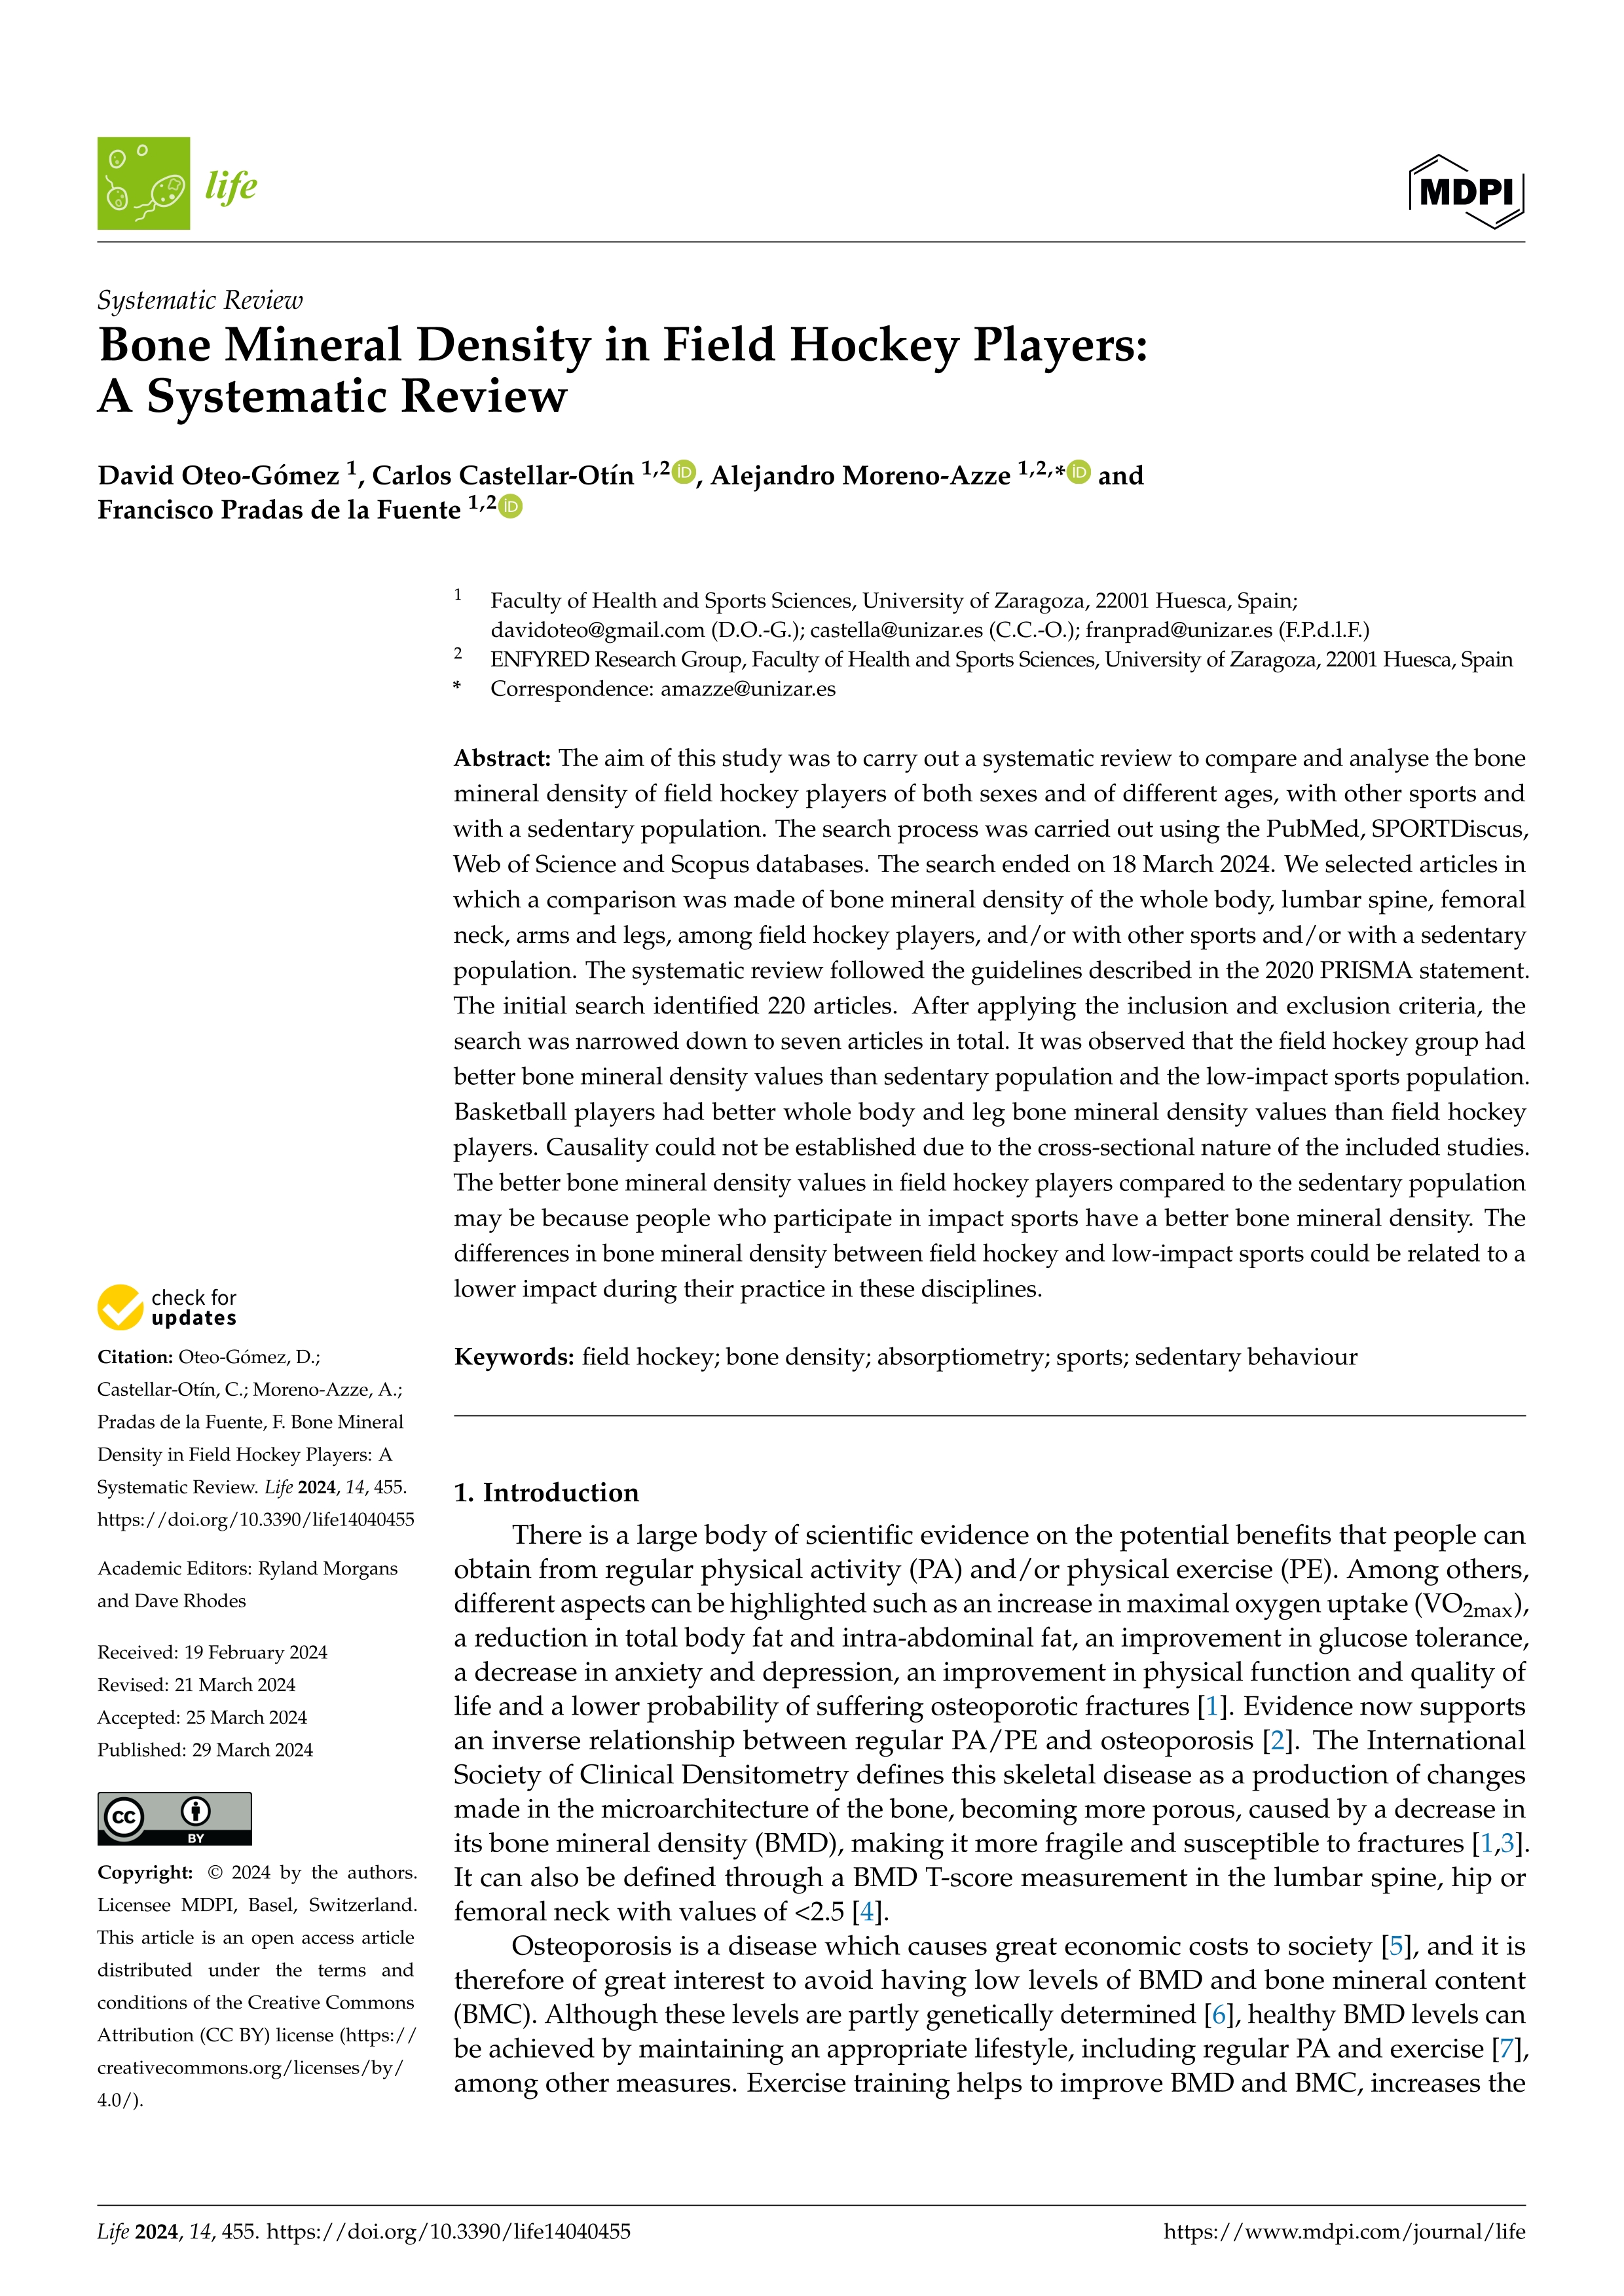 Bone Mineral Density in Field Hockey Players: A Systematic Review